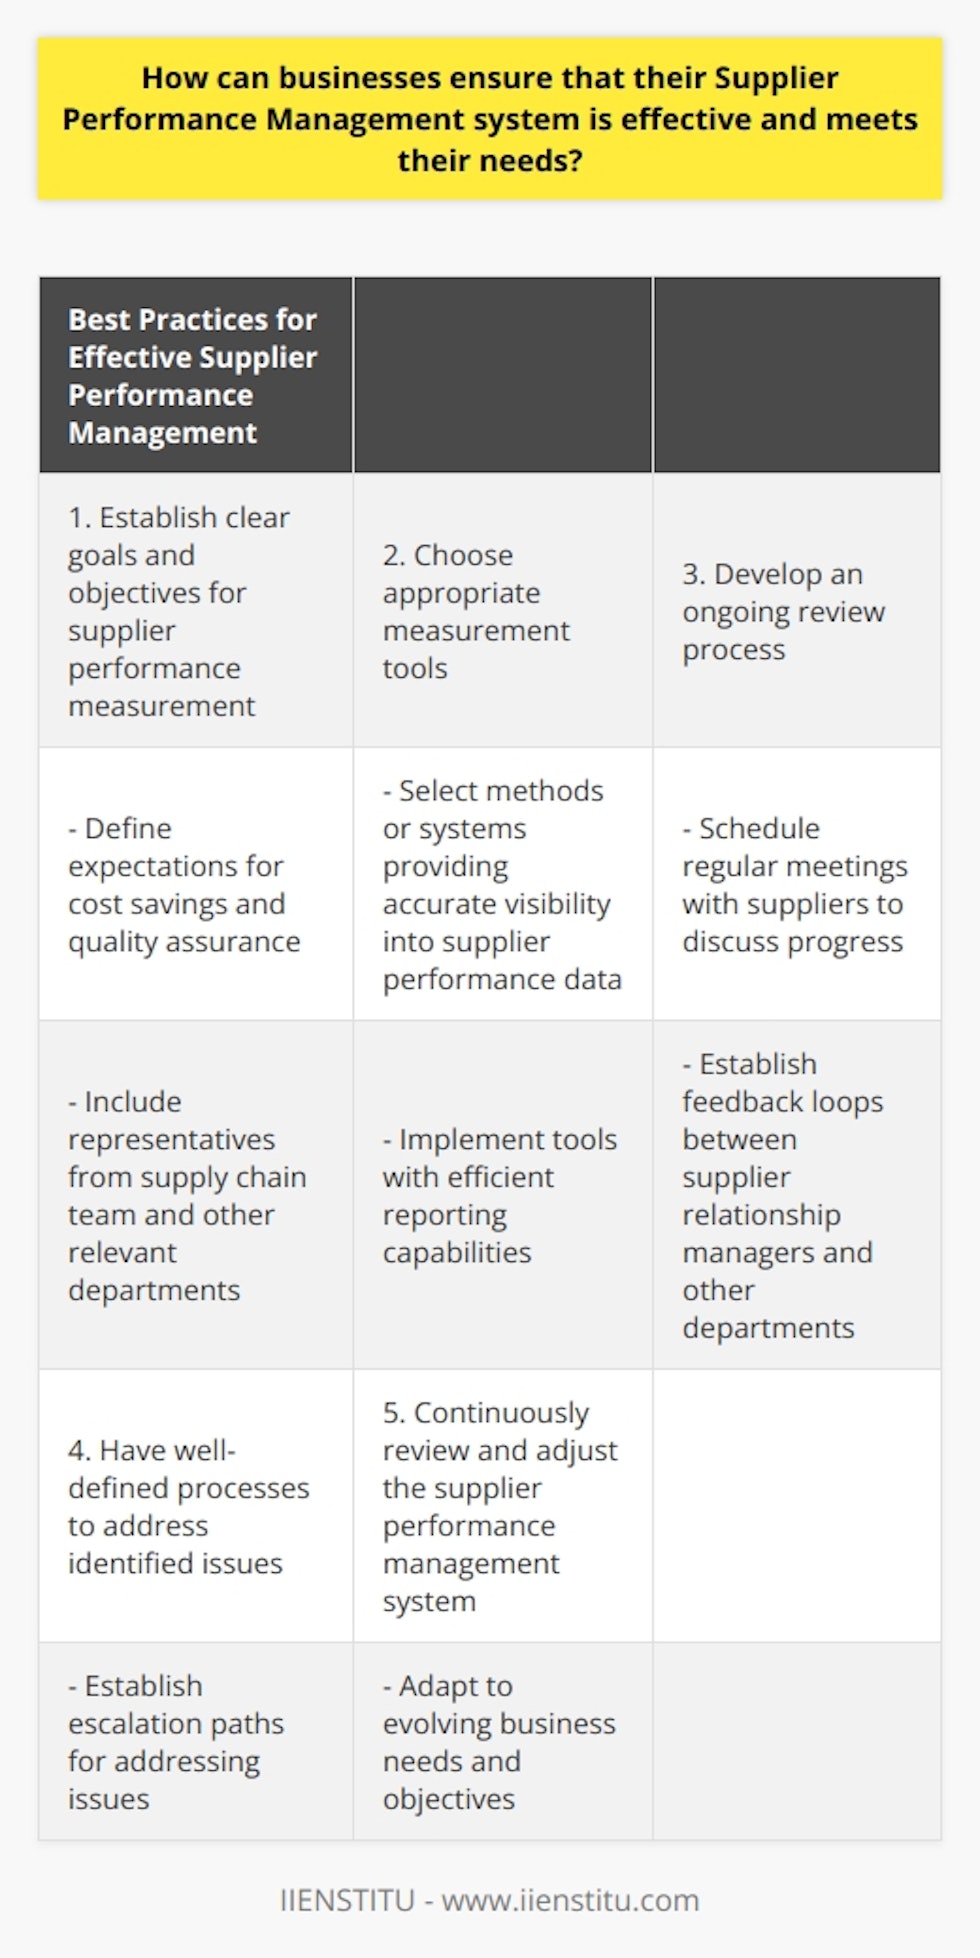 Supplier performance management plays a vital role in the success of businesses. It is crucial for companies to accurately assess and evaluate the performance of their suppliers to ensure the quality of goods and services received, as well as cost efficiency. However, an effective supplier performance management system should be tailored to meet the specific needs of each individual business. This article will provide some best practices for businesses to ensure that their supplier performance management system is effective and aligns with their requirements.First and foremost, it is important for businesses to establish clear goals and objectives for measuring supplier performance. This involves determining expectations for both cost savings and quality assurance initiatives. By defining key indicators, companies can effectively measure progress and track performance towards these goals. It is advisable to involve representatives from the supply chain team and other relevant departments within the organization to ensure that all stakeholders understand their roles and responsibilities in achieving these objectives.Choosing appropriate measurement tools is the next crucial step. This includes selecting a method or system that provides accurate visibility into supplier performance data. In addition, the chosen tools should offer efficient reporting capabilities, such as automated dashboards or scorecards, which can be used by executives and decision-makers. By implementing analytics software, businesses can gain valuable insights into supplier behavior, facilitating the identification of areas for improvement or potential cost savings.Once suitable measurement tools have been identified, businesses must develop an ongoing review process for evaluating supplier performance. This may involve scheduling regular meetings with suppliers to discuss progress towards goals established during the setup phases. Moreover, establishing feedback loops between those responsible for managing supplier relationships and other departments within the organization is crucial. This ensures that any changes or improvements are effectively communicated across all relevant parties involved in the supply chain process.Finally, it is necessary for companies to have well-defined processes in place to address any issues identified during the supplier performance reviews. These processes should include clearly established escalation paths so that any issues requiring further attention can be quickly identified and appropriately addressed. Effective communication between the involved parties is essential to minimize disruptions or delays caused by breakdowns in communication between those managing supplier relationships within the organization.By following these best practices when implementing a Supplier Performance Management system, businesses can enhance the value derived from their relationships with suppliers. Simultaneously, they can meet internal goals set by upper-level management teams regarding cost savings initiatives or quality assurance standards. It is crucial for companies to adapt and continuously review and adjust their supplier performance management system to ensure its effectiveness and alignment with their evolving business needs and objectives.